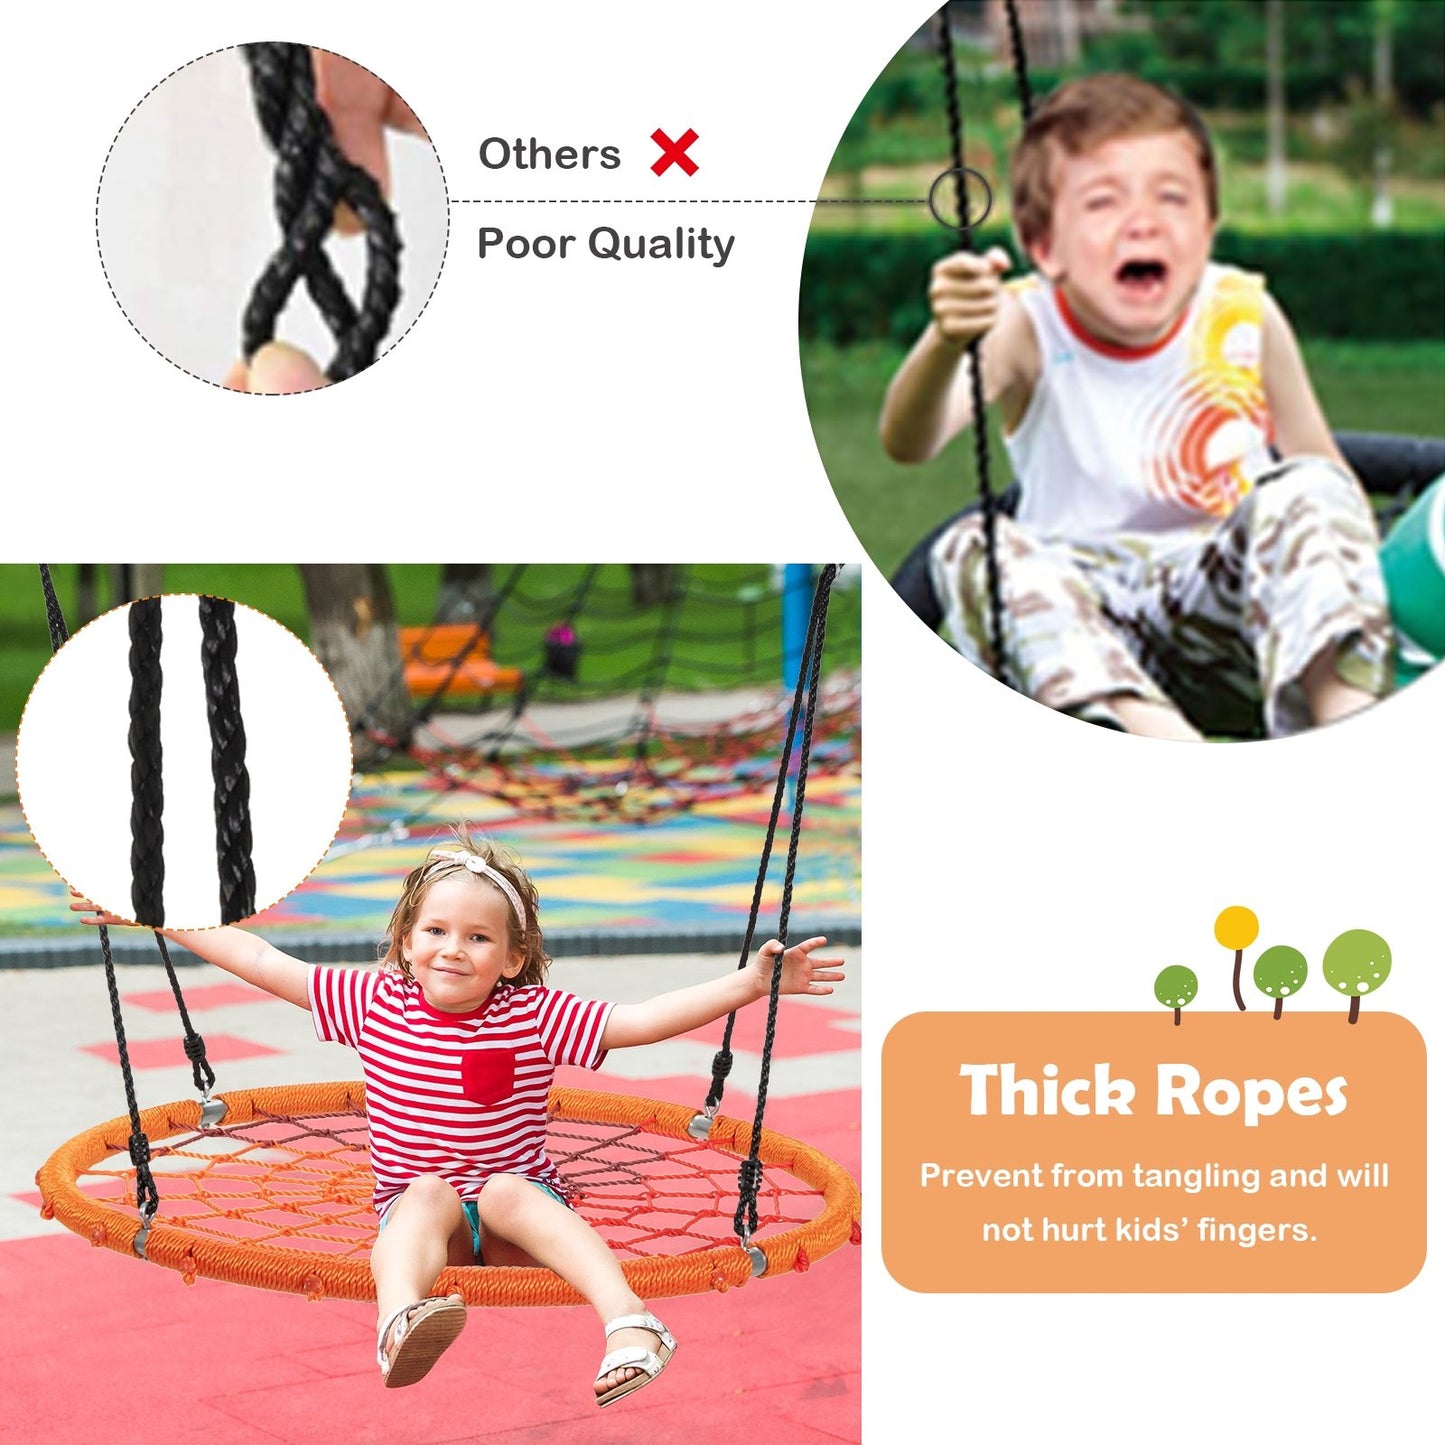 40 Inch Spider Web Tree Swing Kids Outdoor Play Set with Adjustable Ropes, Orange - Gallery Canada